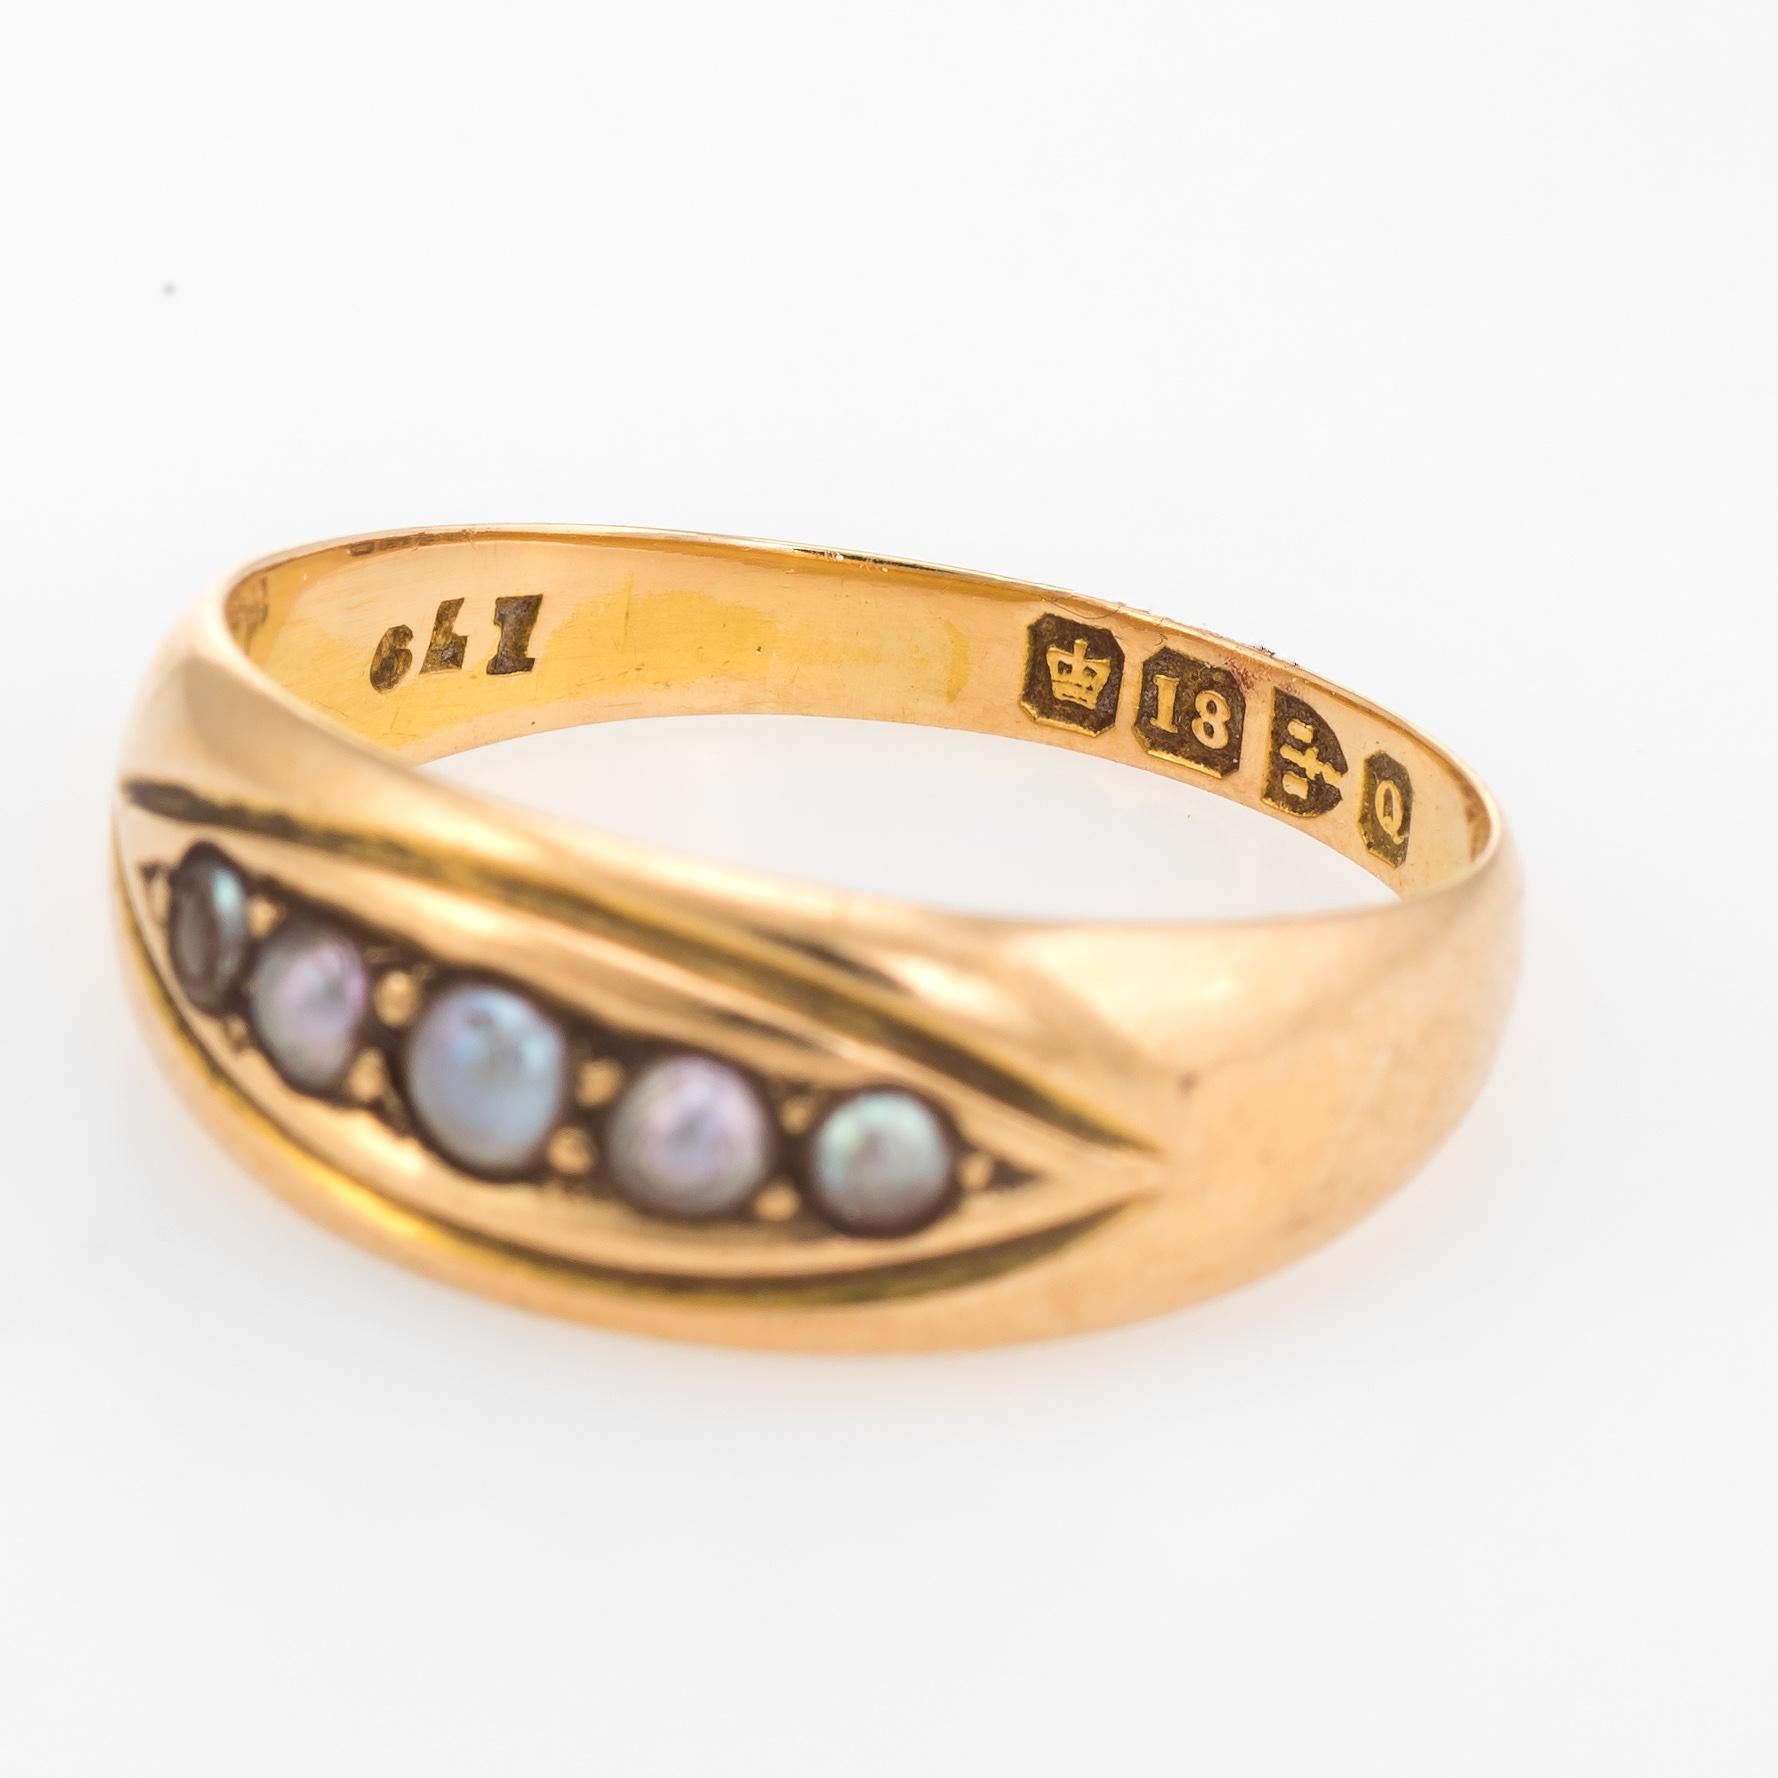 Antique Seed Pearl Gypsy Band Victorian Ring 18 karat Gold Chester Vintage 3